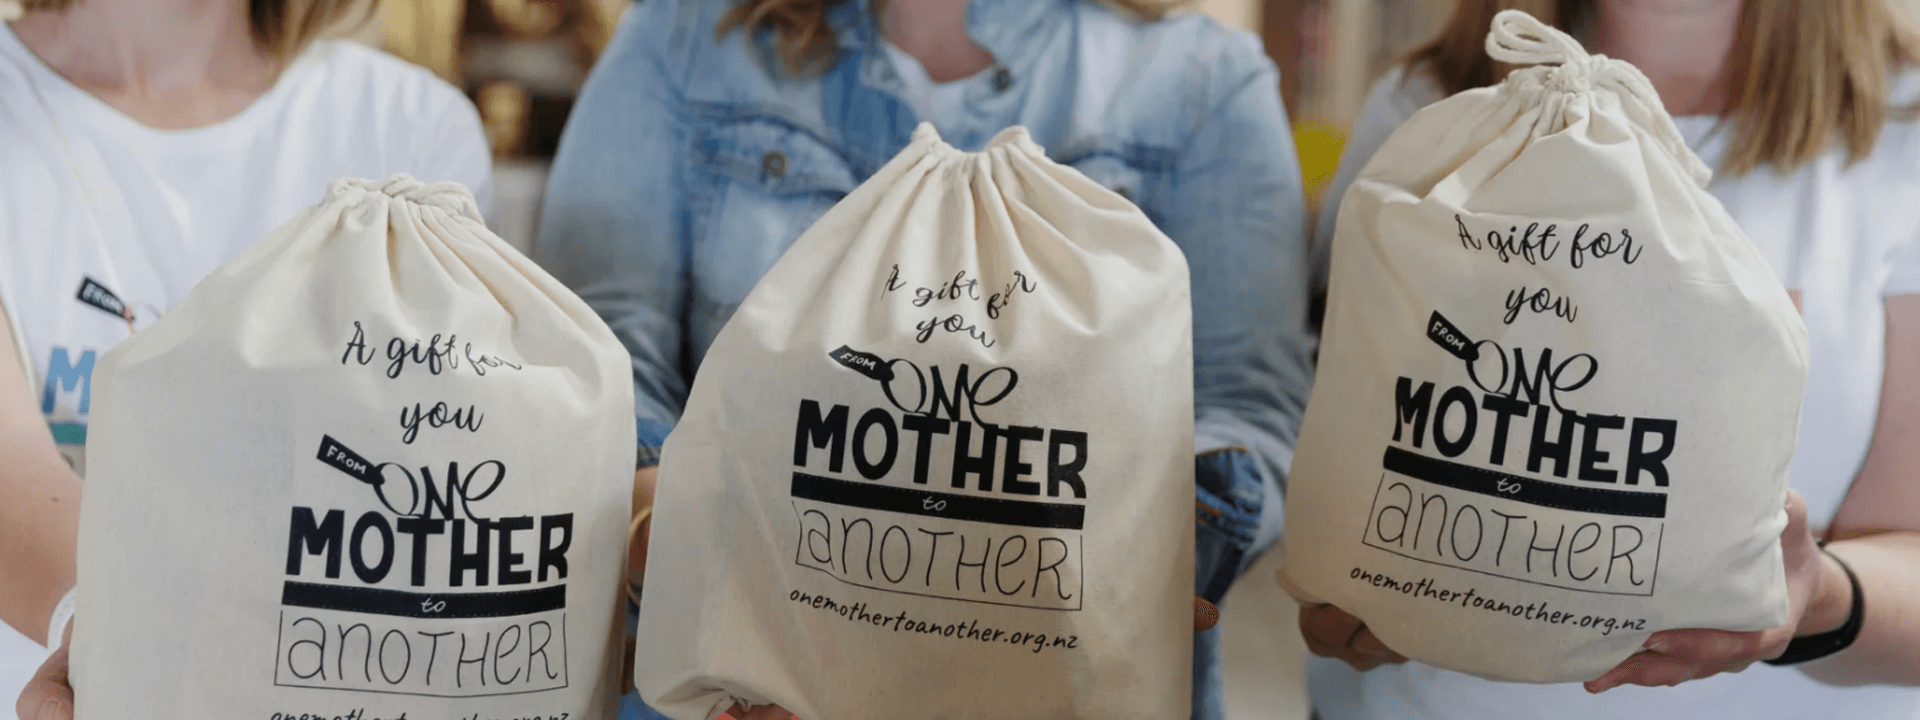 Partnering With From One Mother to Another